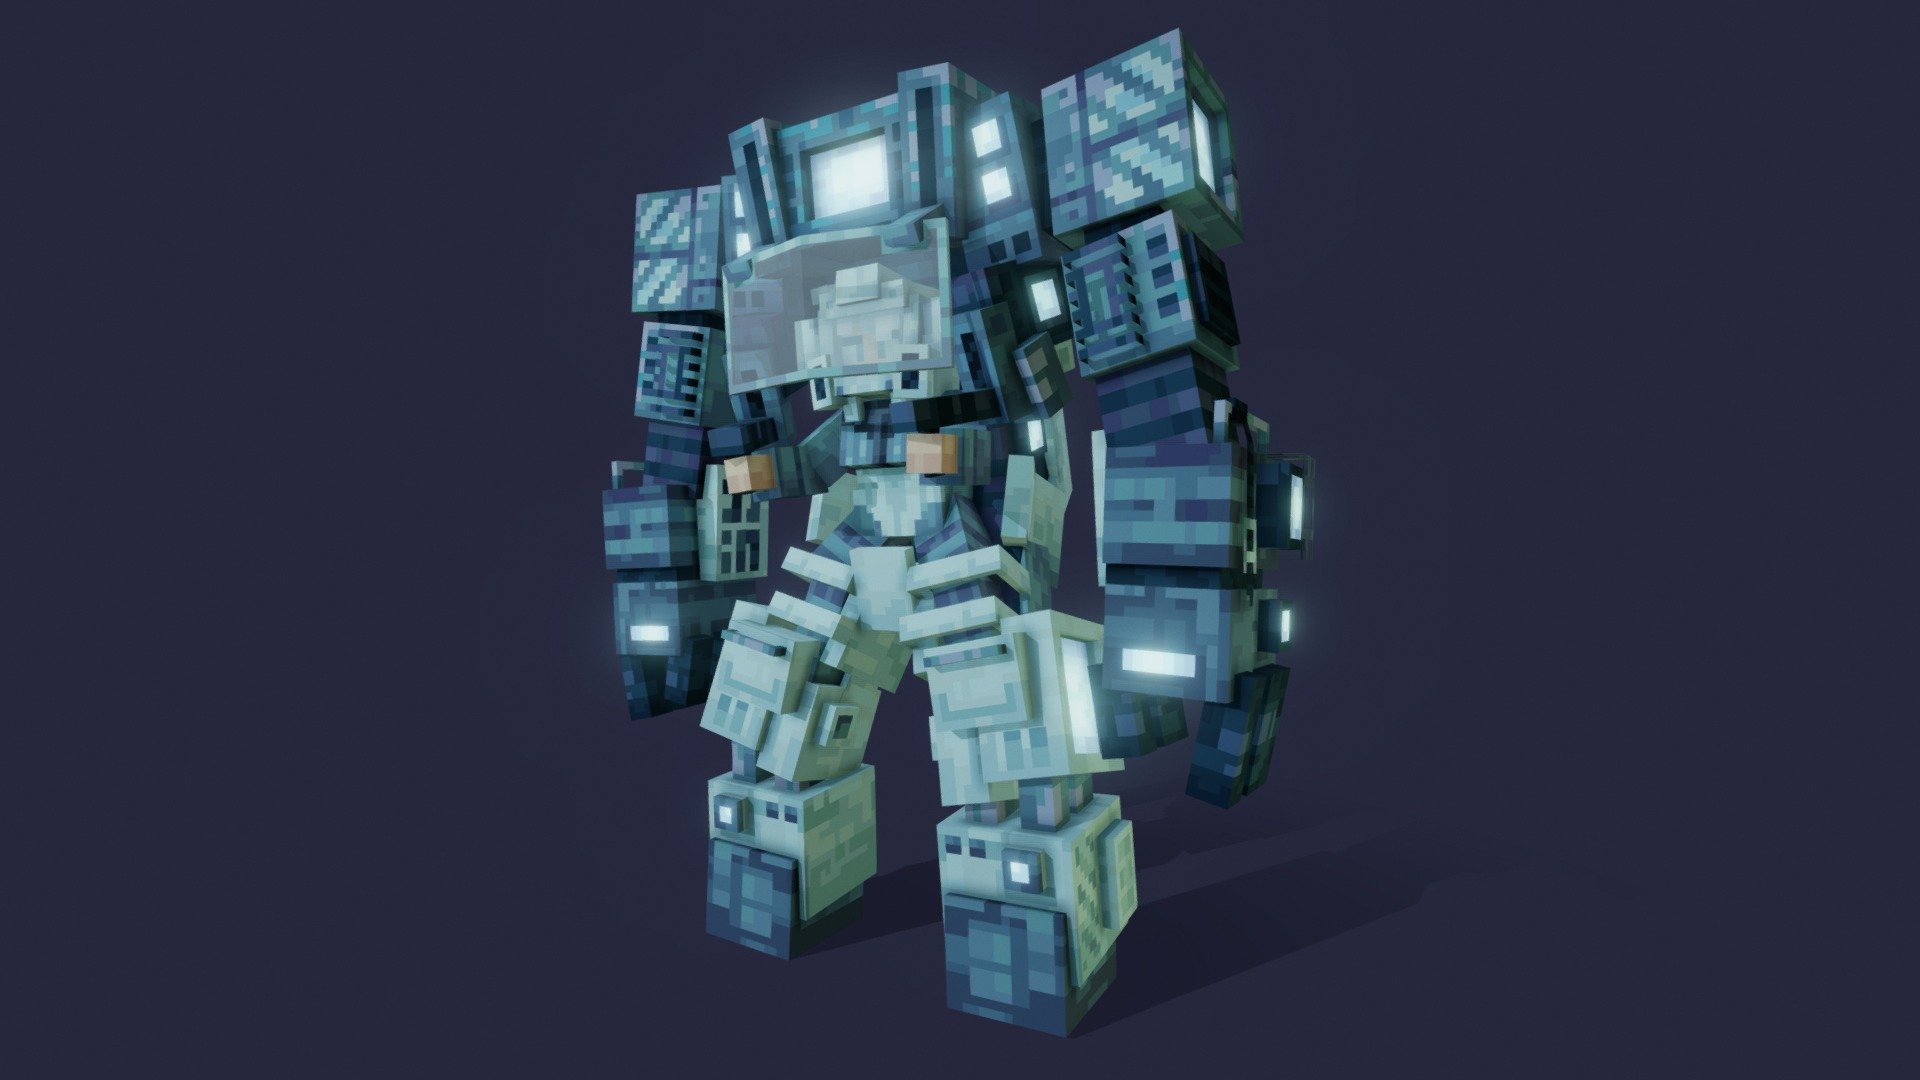 Mech model I did to test out new texturing style.
Modeled and painted with Blockbench.

Blender Eevee render



Blockbench screenshots

 - Glacier Mech - 3D model by Wacky (@wackyblocks) 3d model